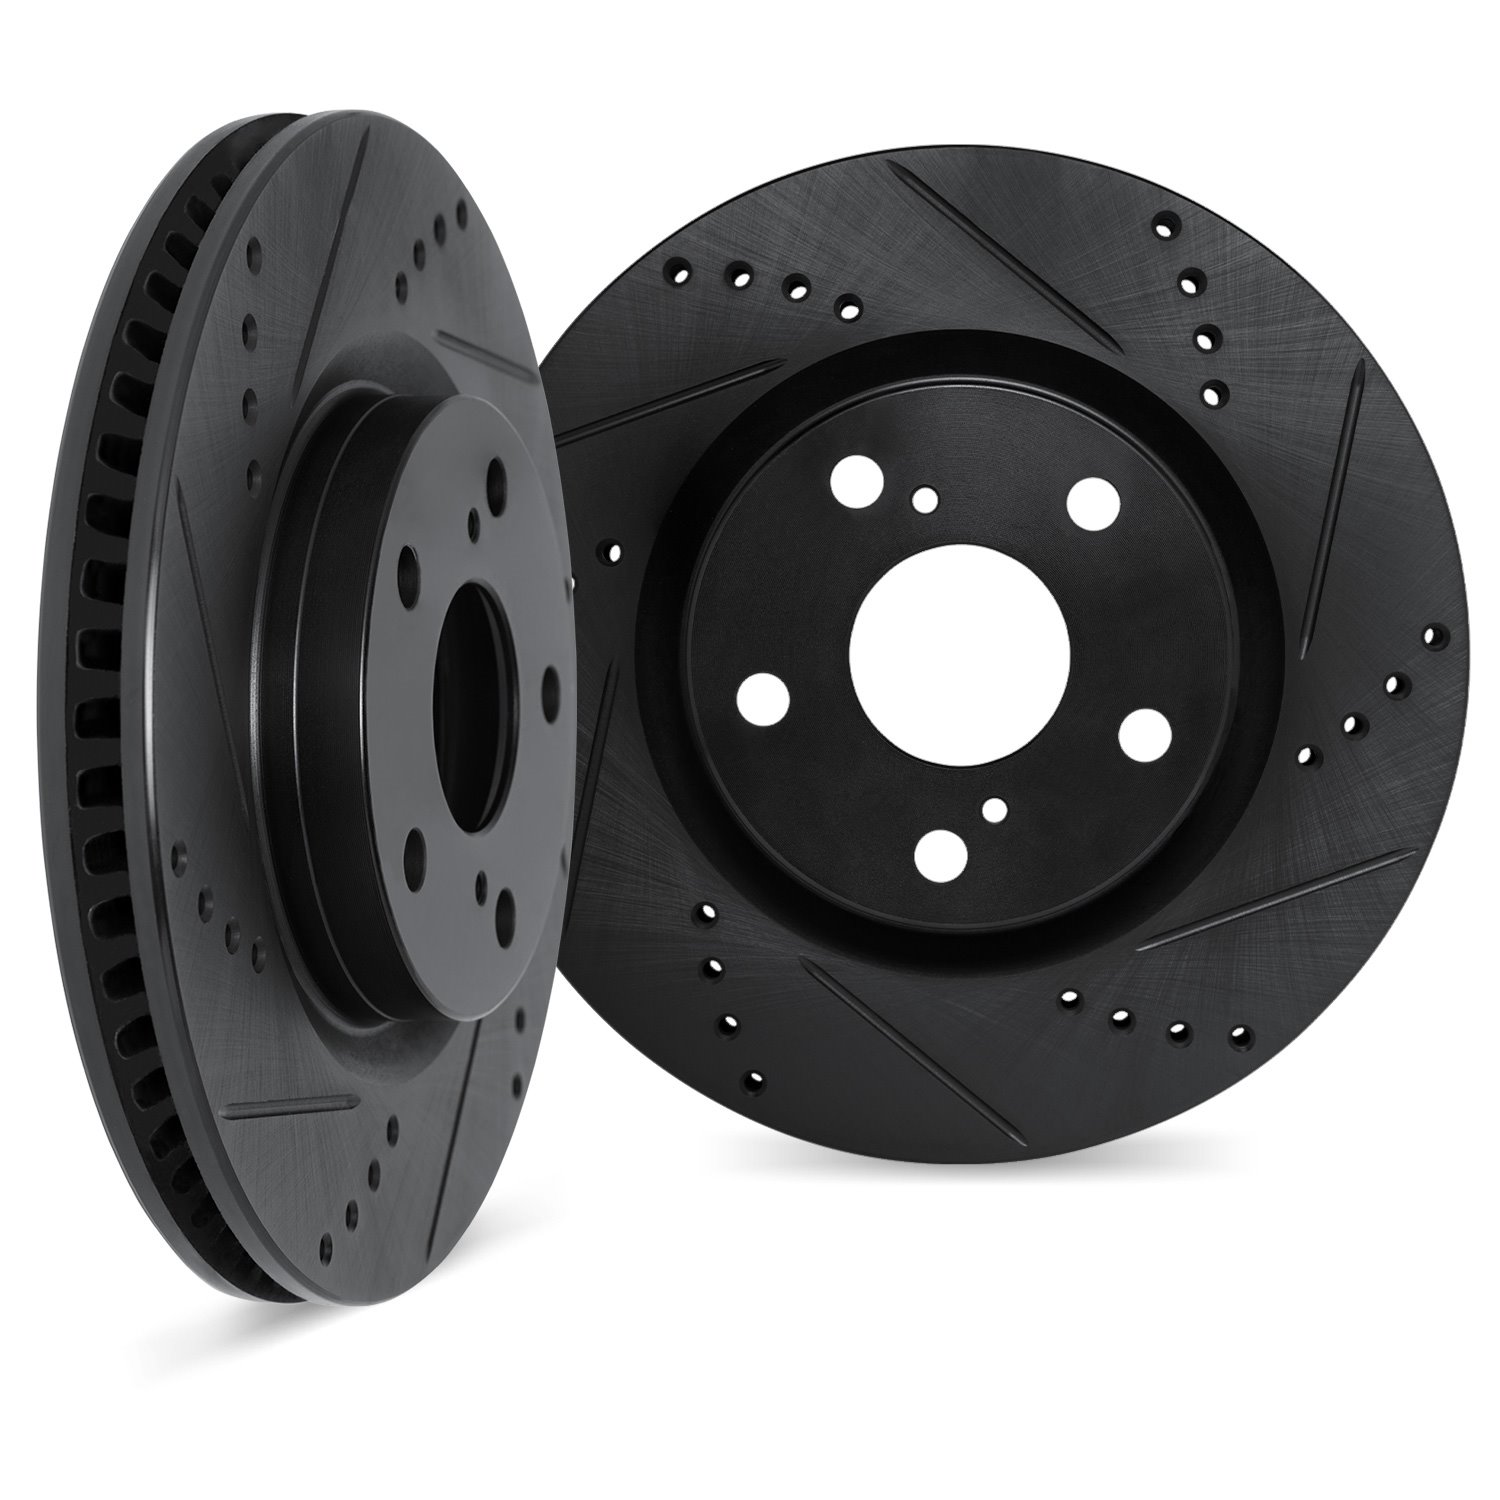 8002-76144 Drilled/Slotted Brake Rotors [Black], 1992-1995 Lexus/Toyota/Scion, Position: Rear